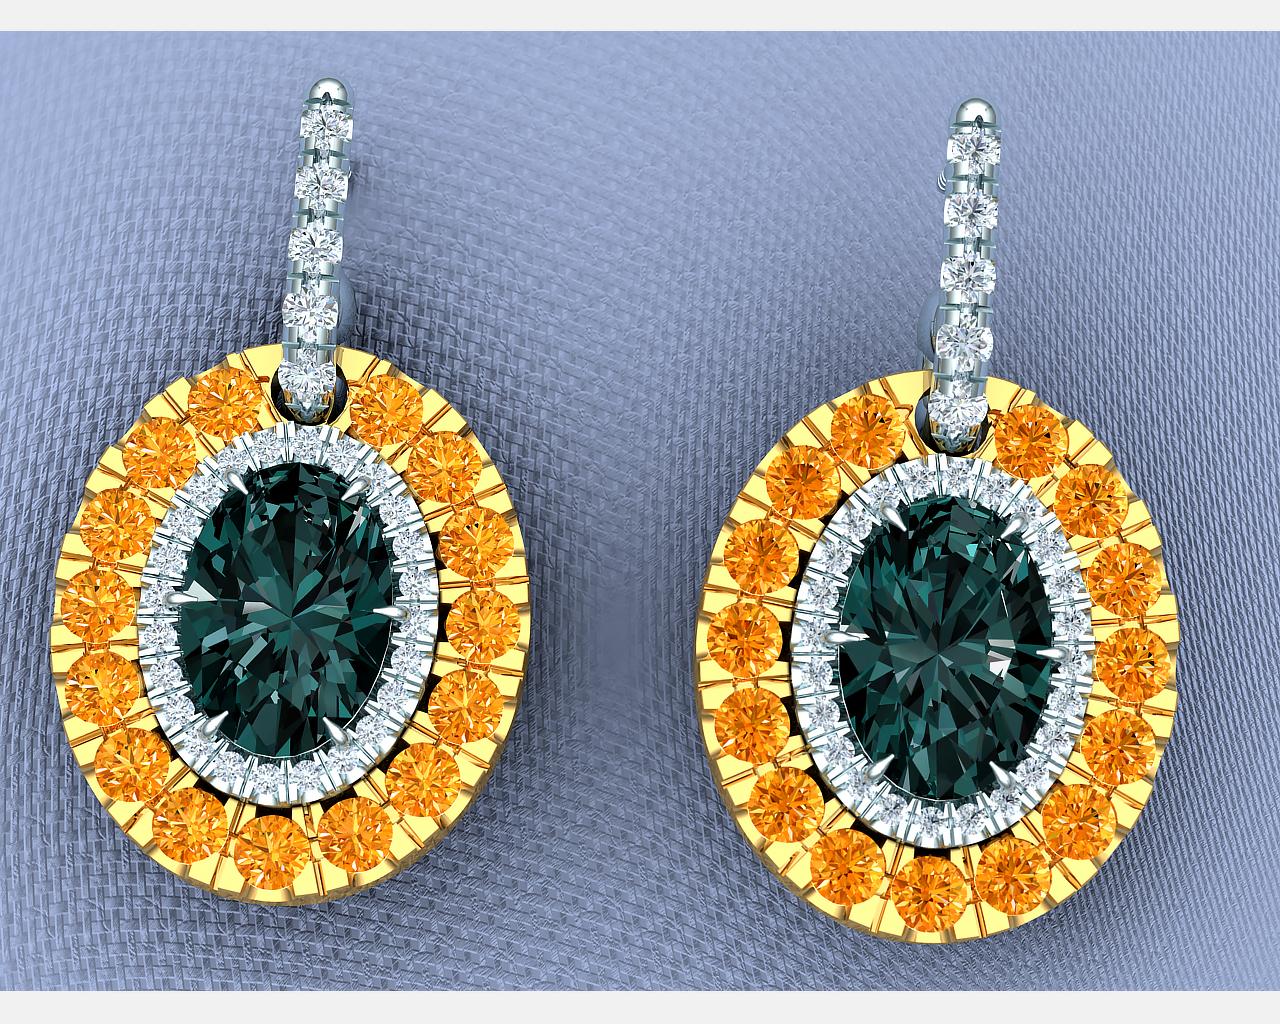 Complimentary colors are seen in full display on these beautiful teal blue-green and orange sapphire drop earrings.  For an earring that dangles these capture a lot of light and provides bold colors while giving sparks of white diamonds.  The total